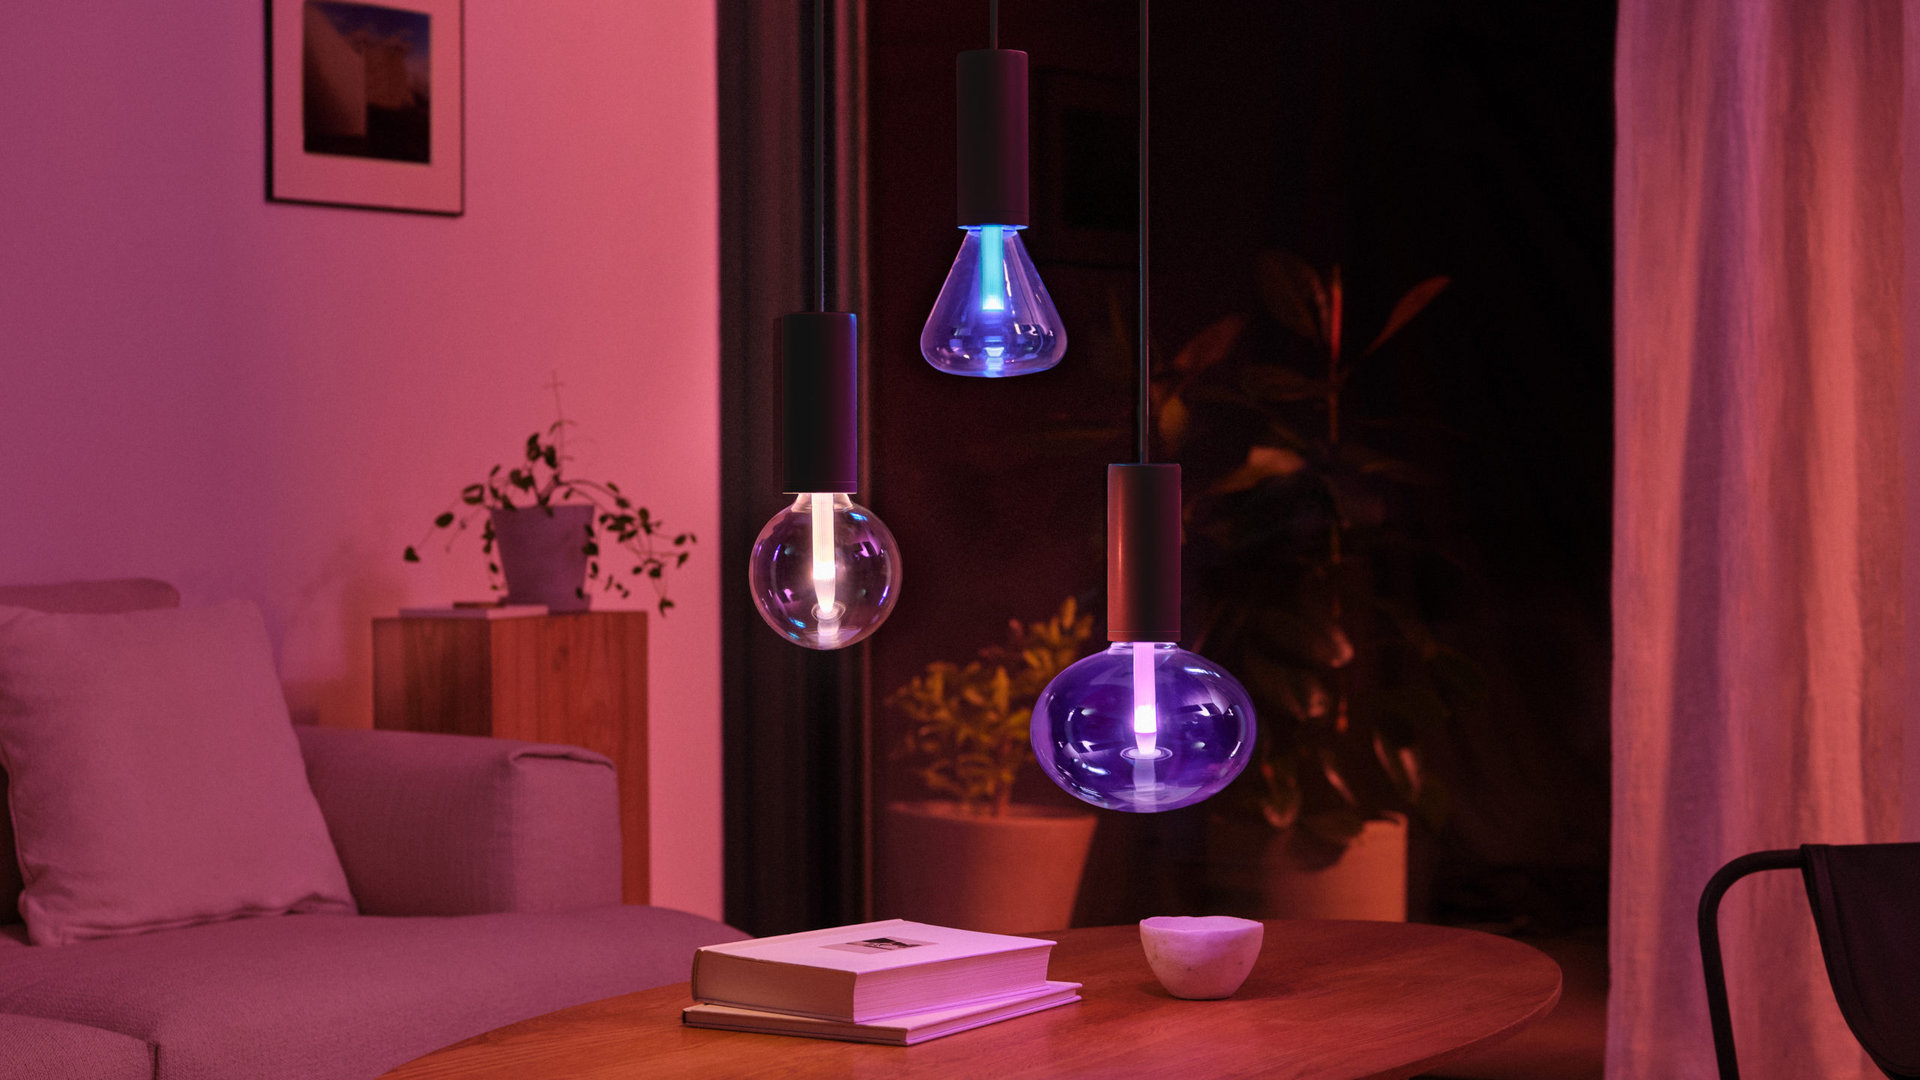 Philips Hue Lightguide bulbs and matching pendant light cords